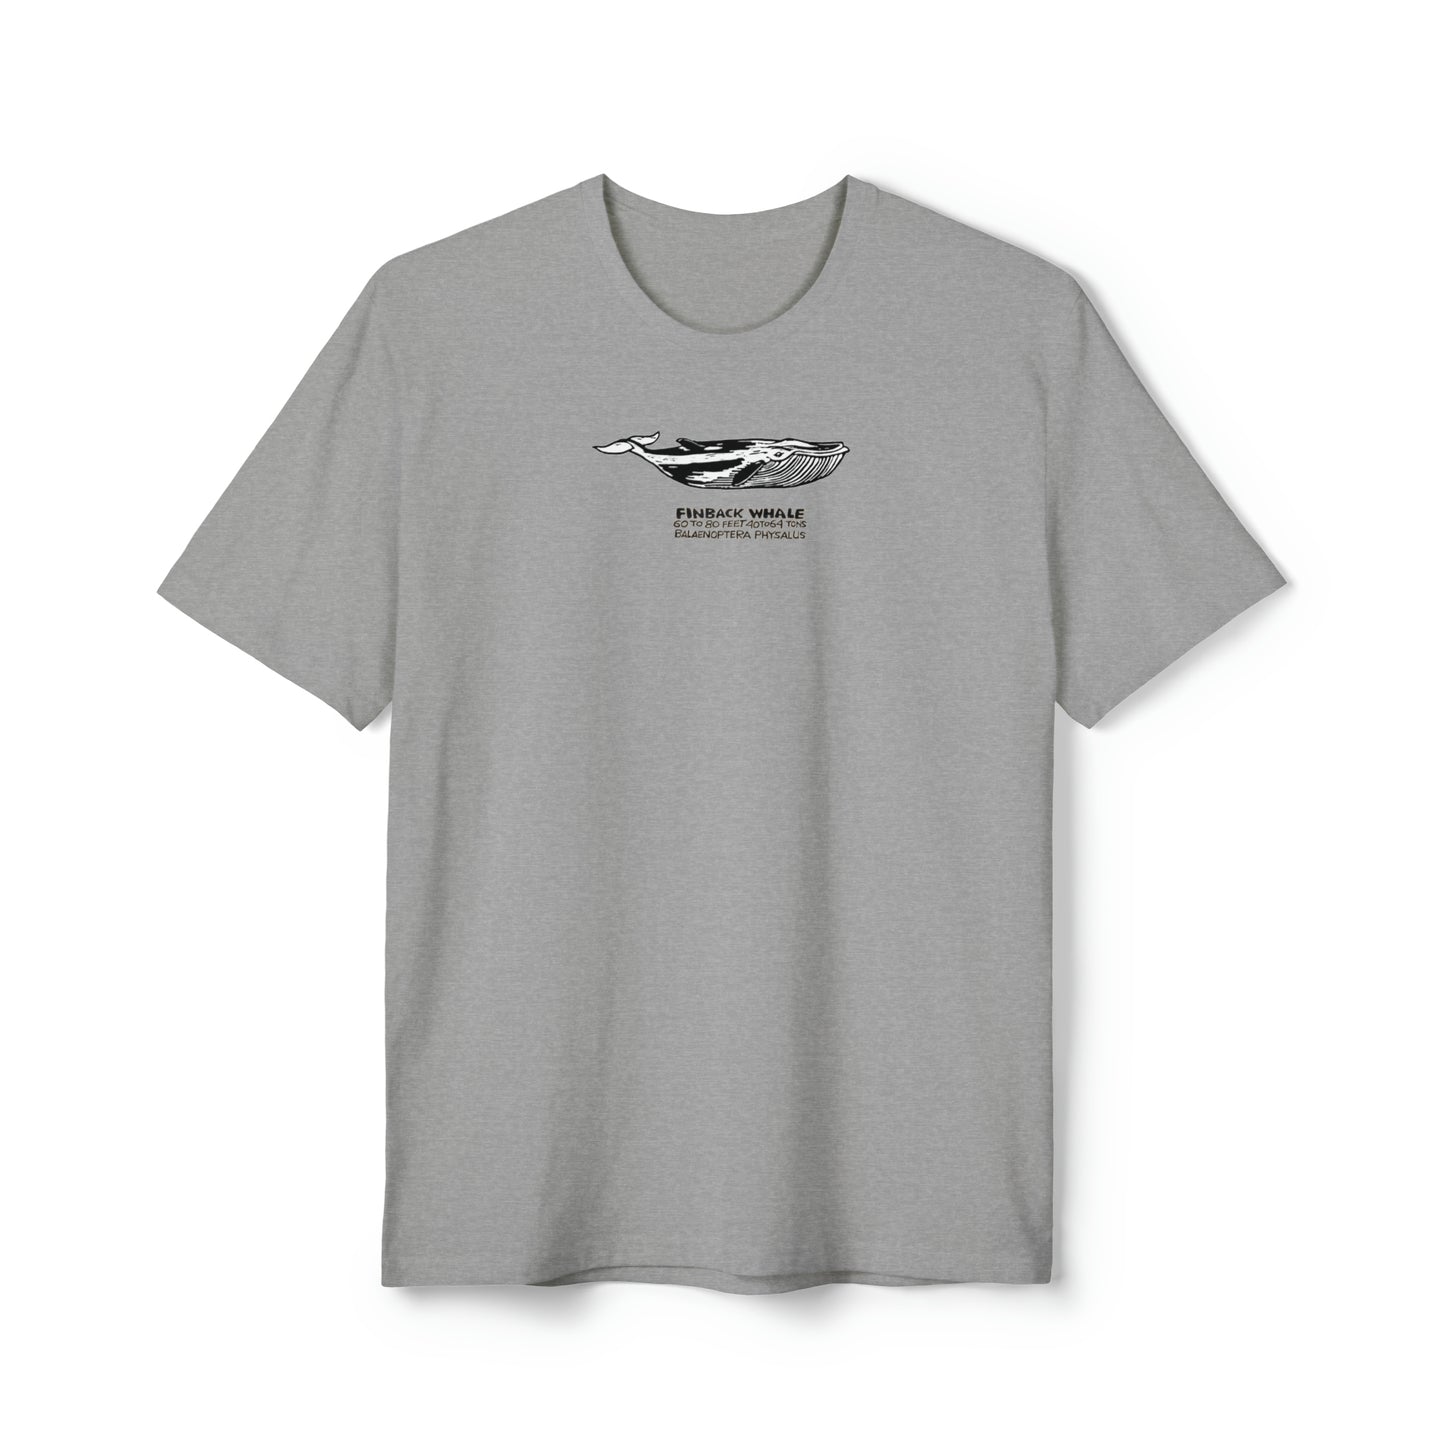 Black, white, and grey Finback Whale on light heather grey color unisex men's t-shirt. Text under image says Finback Whale plus height weight and Latin name.